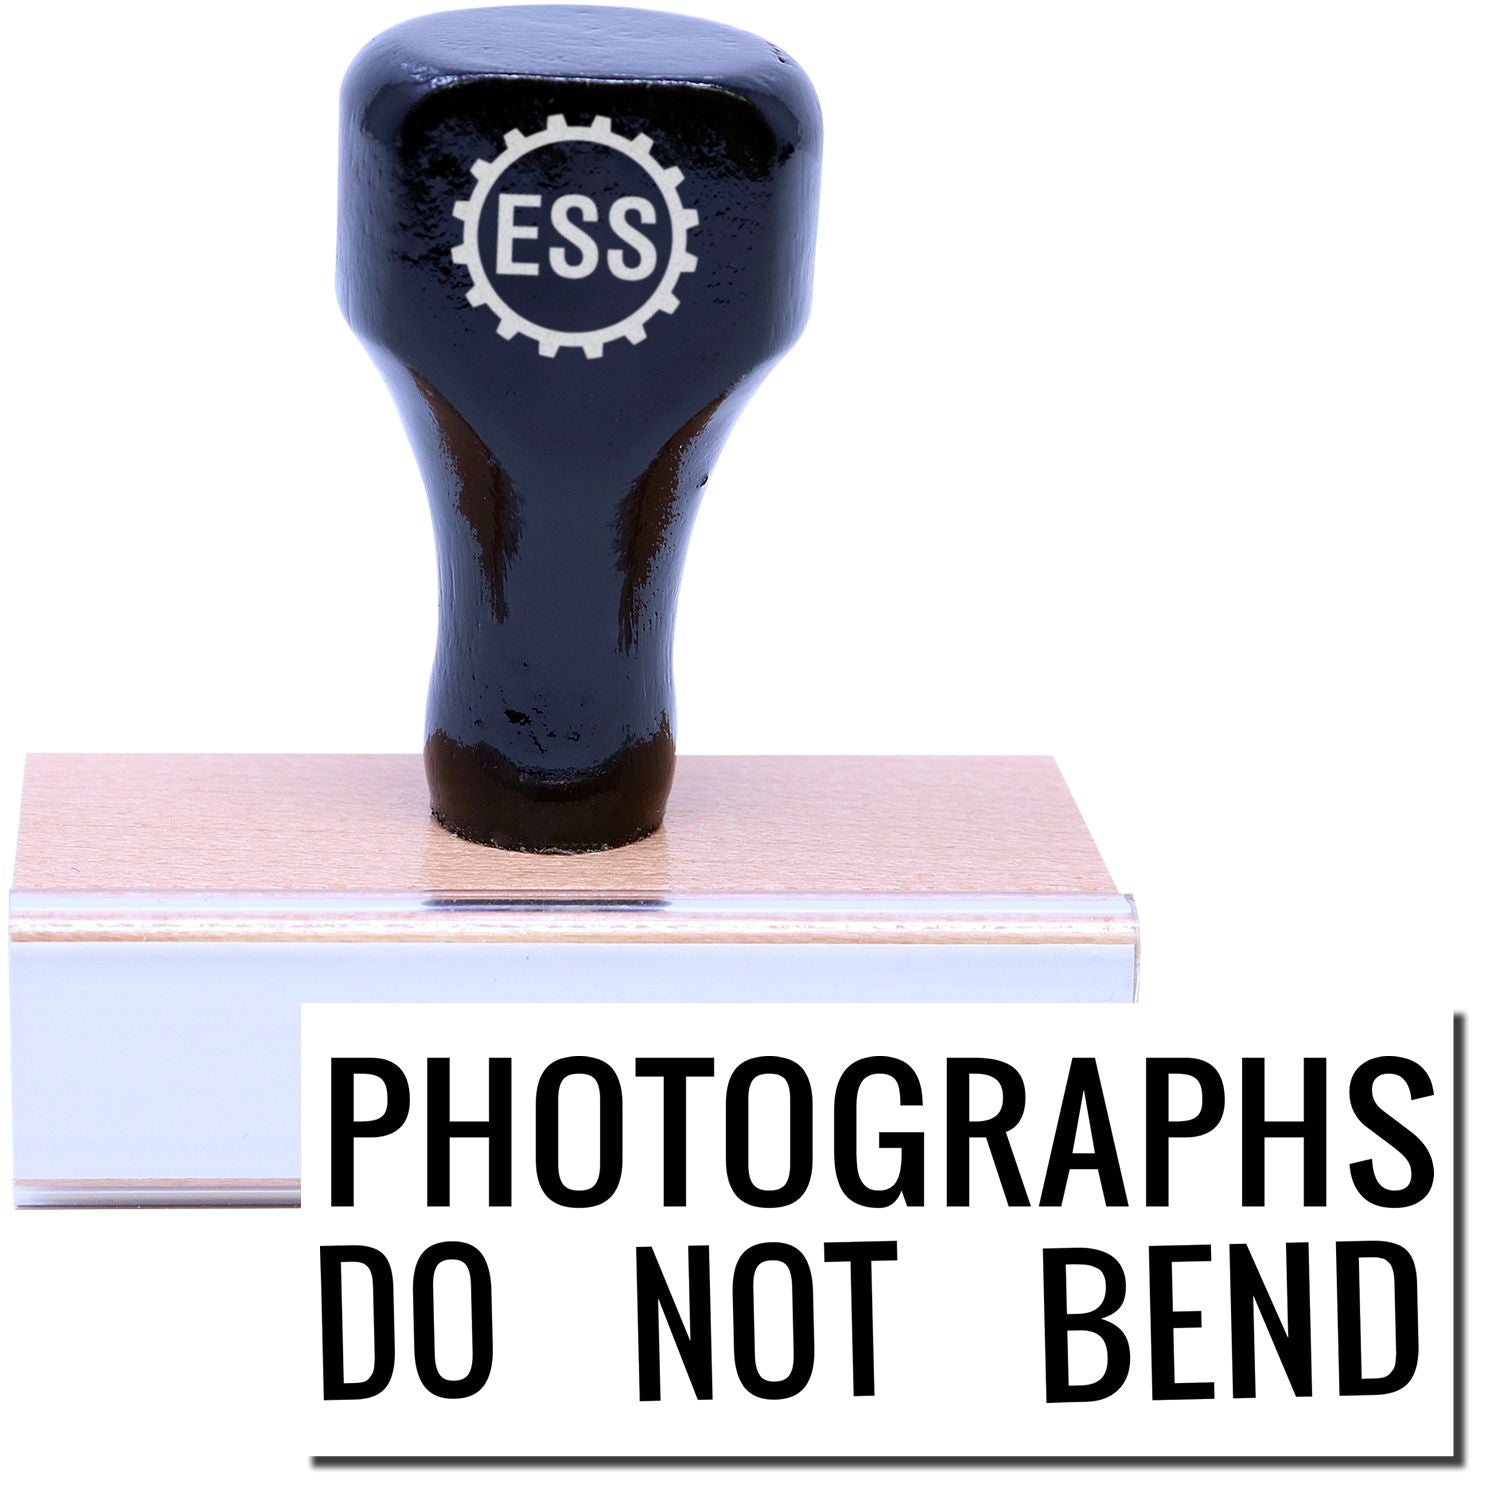 A stock office rubber stamp with a stamped image showing how the text "PHOTOGRAPHS DO NOT BEND" in a large font is displayed after stamping.